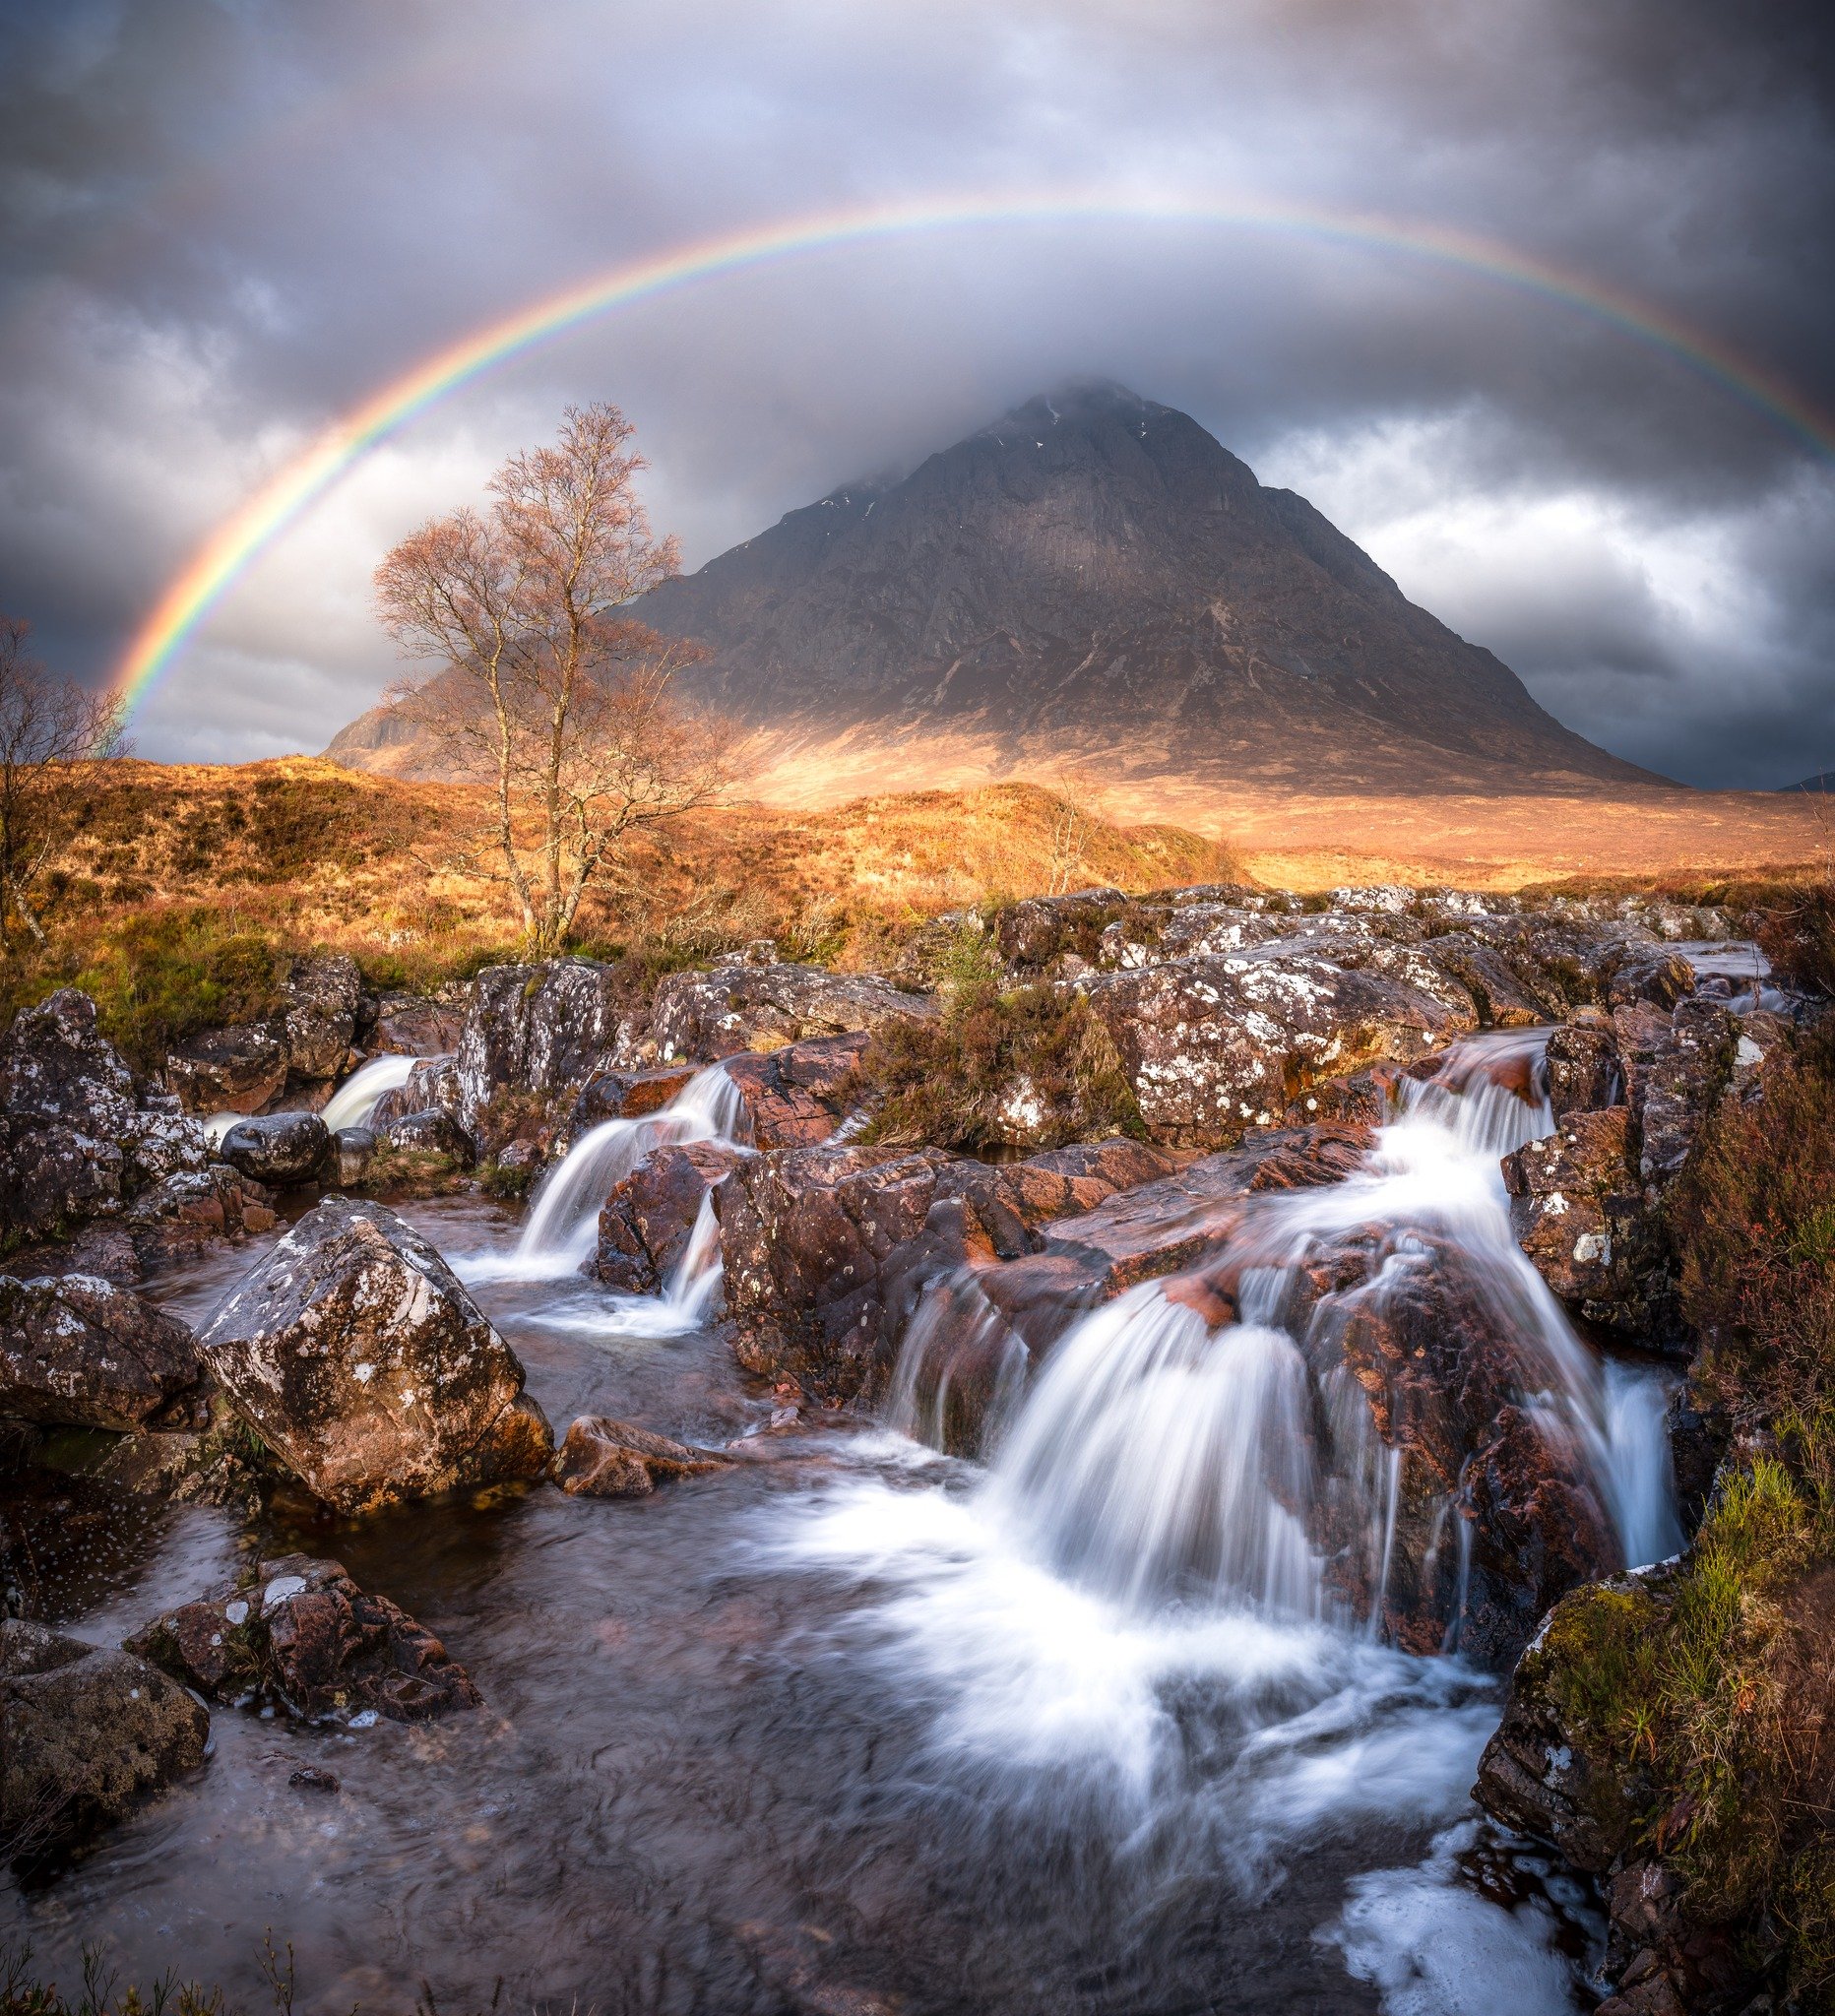 Wishing that I was back in Glencoe capturing rainbows over beautiful waterfalls 😍
This photo was captured in quite a rush - the rainbow started to appear as we were parking the car. Luckily it lasted long enough for me to grab this image! A truly un